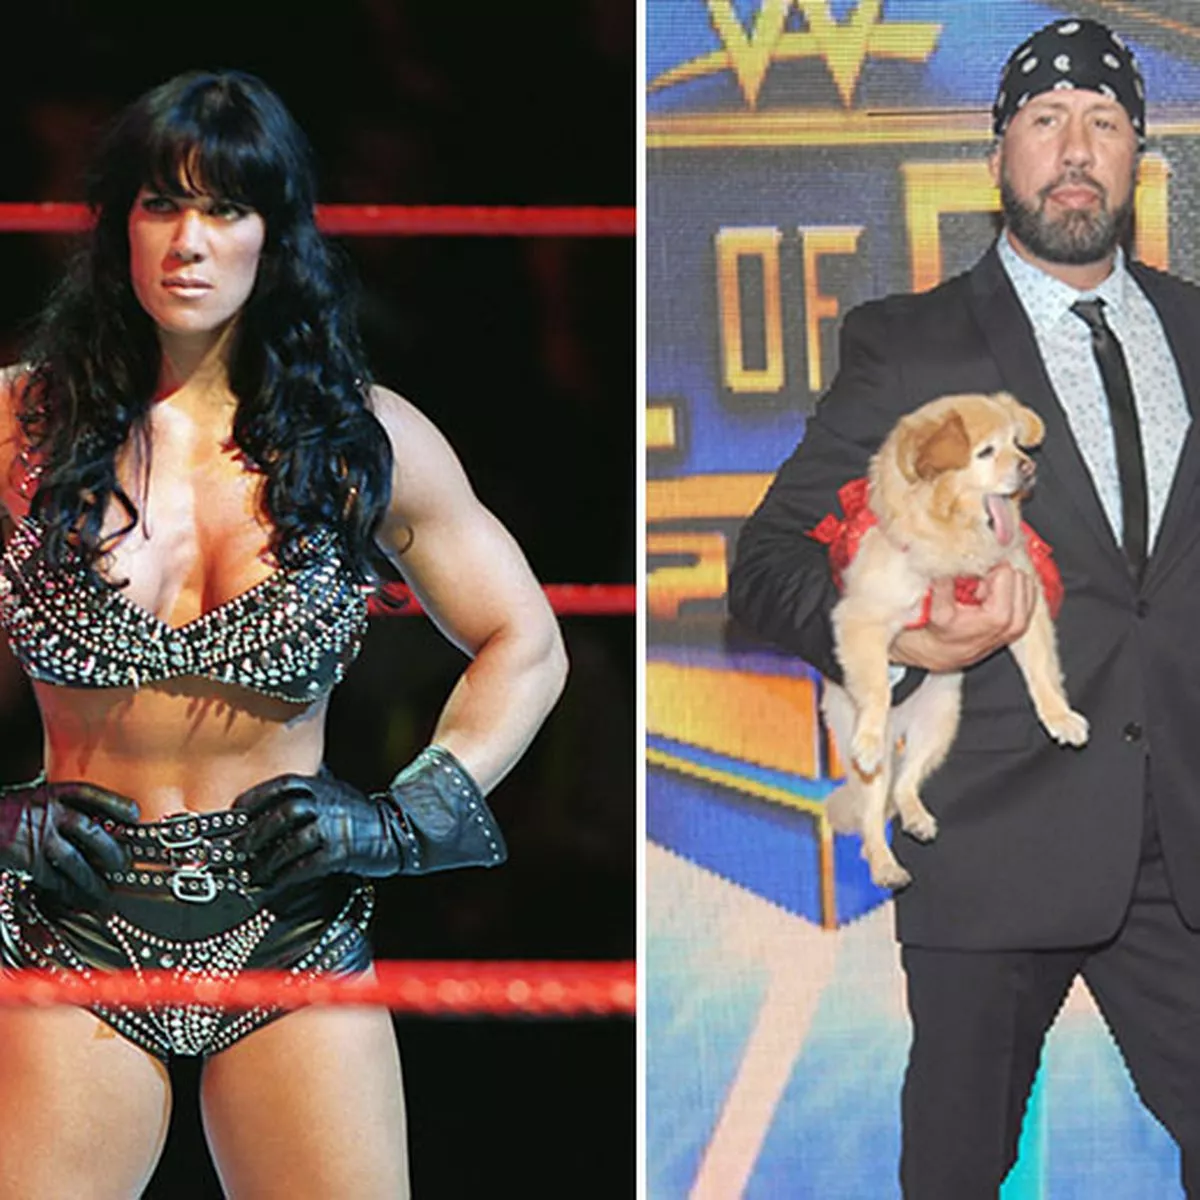 carl stephen recommends x pac and chyna pic